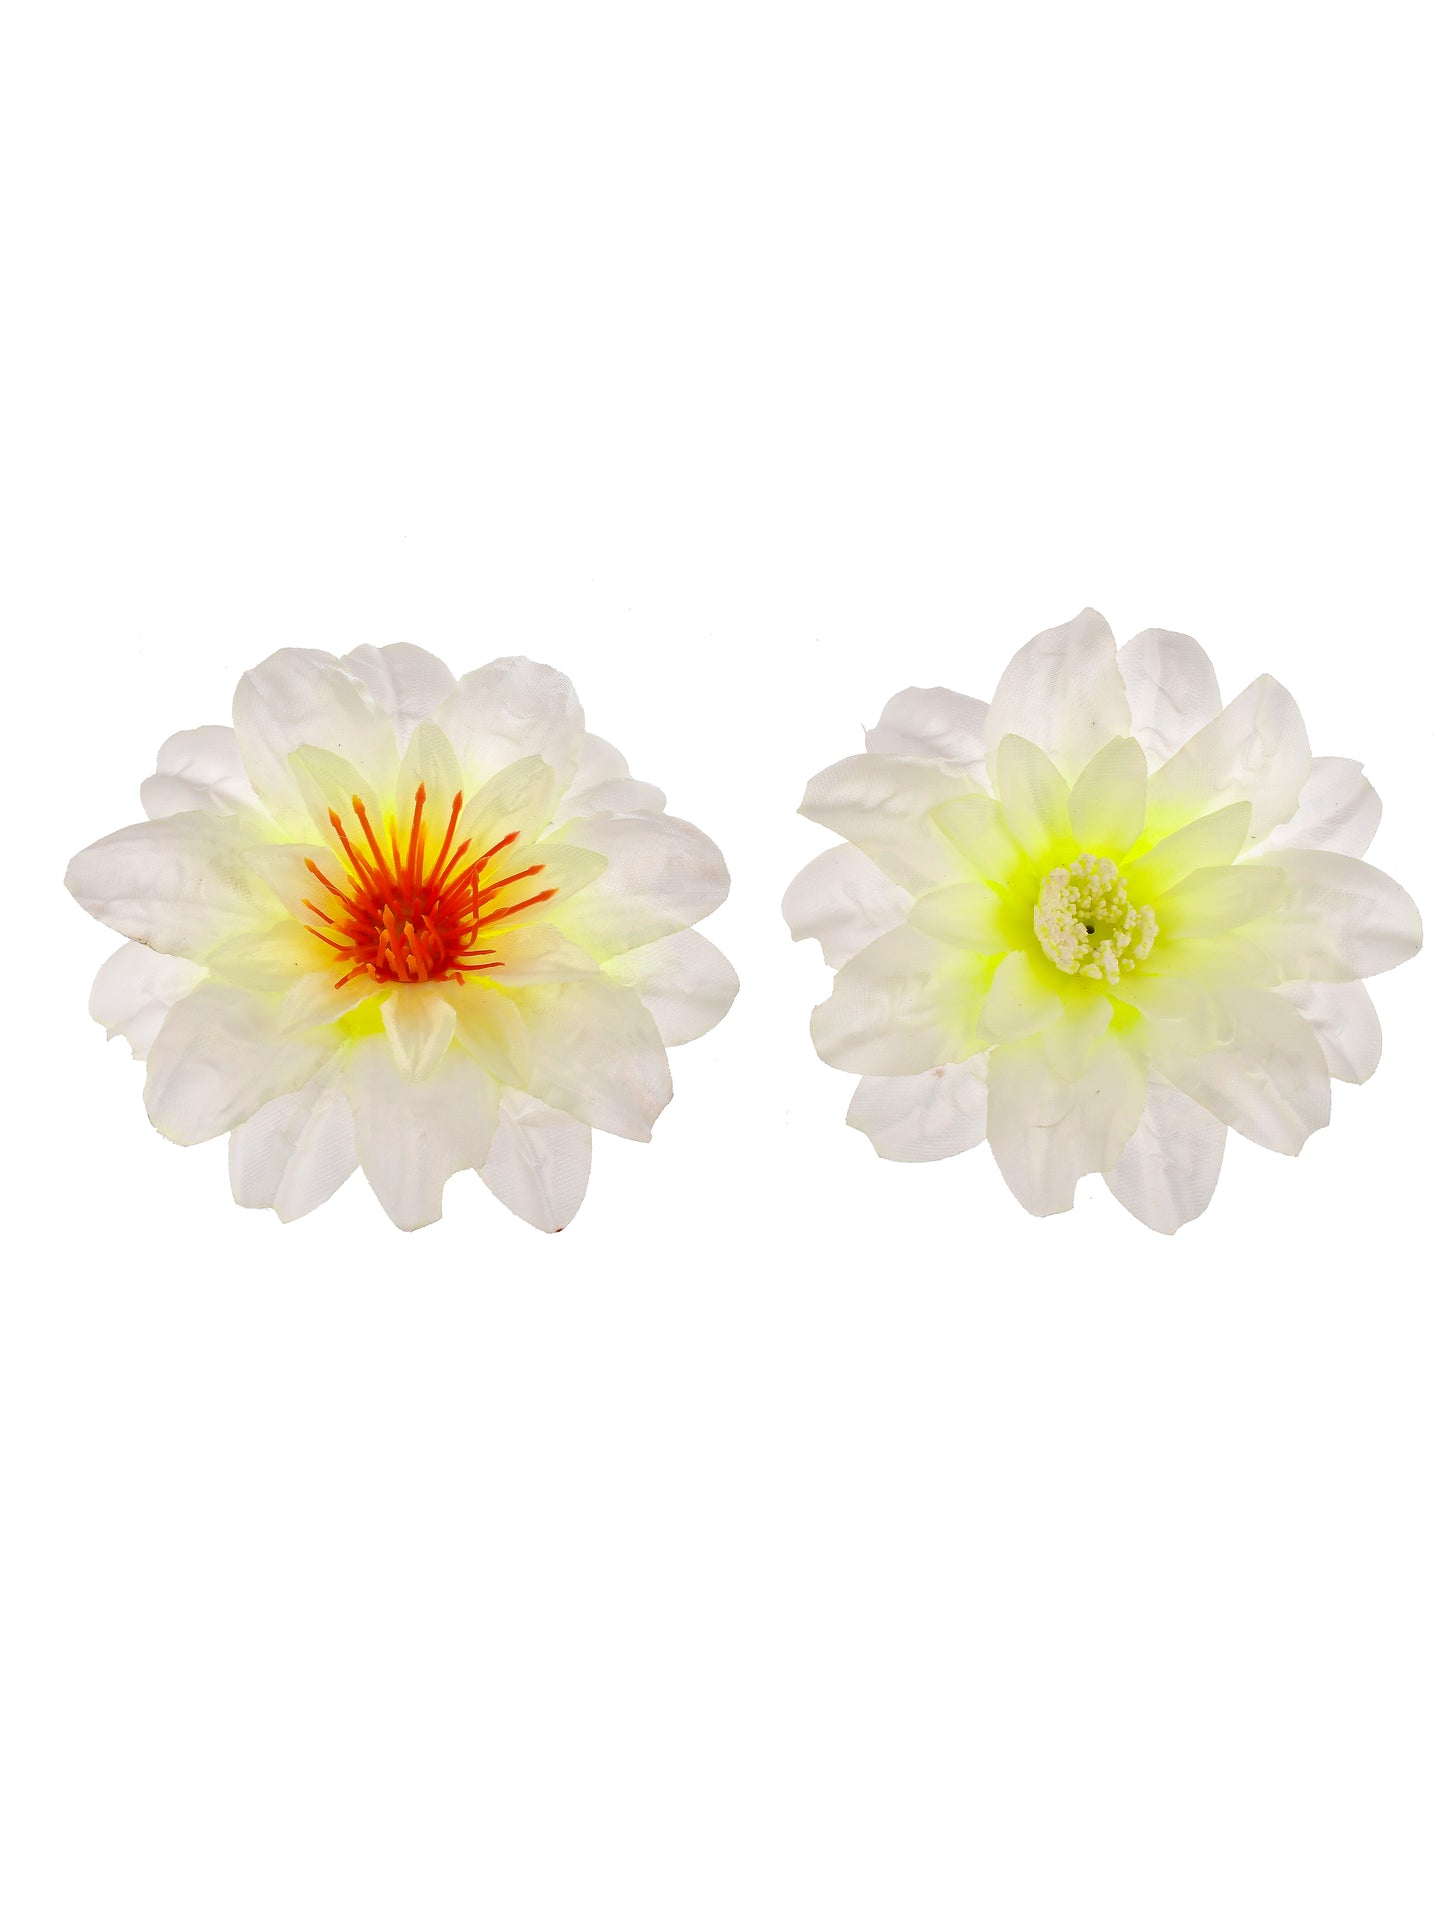 Two White Floral Hair Accessory